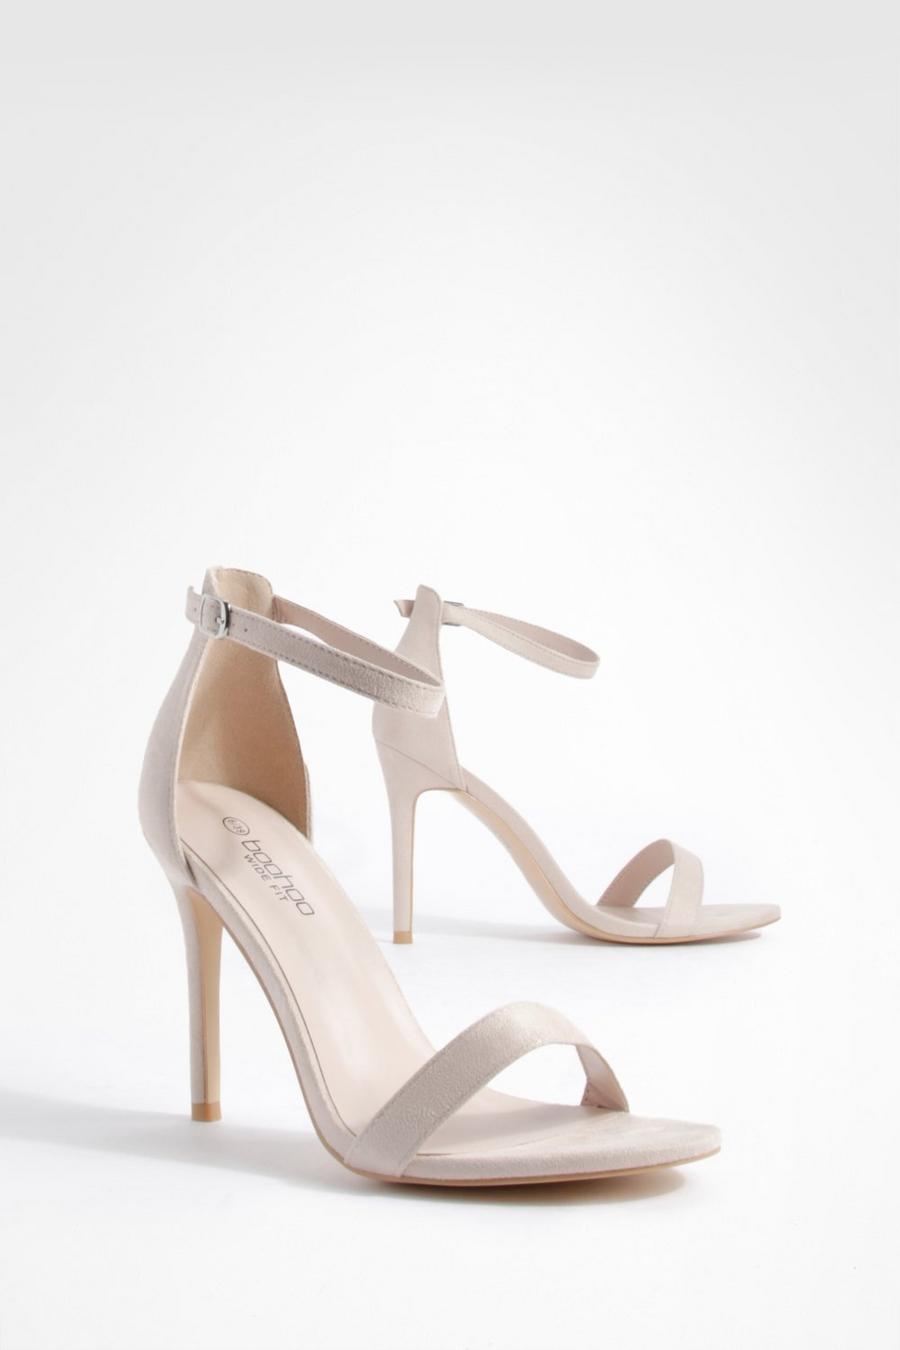 Blush Wide Fit Barely There Basic Heels   